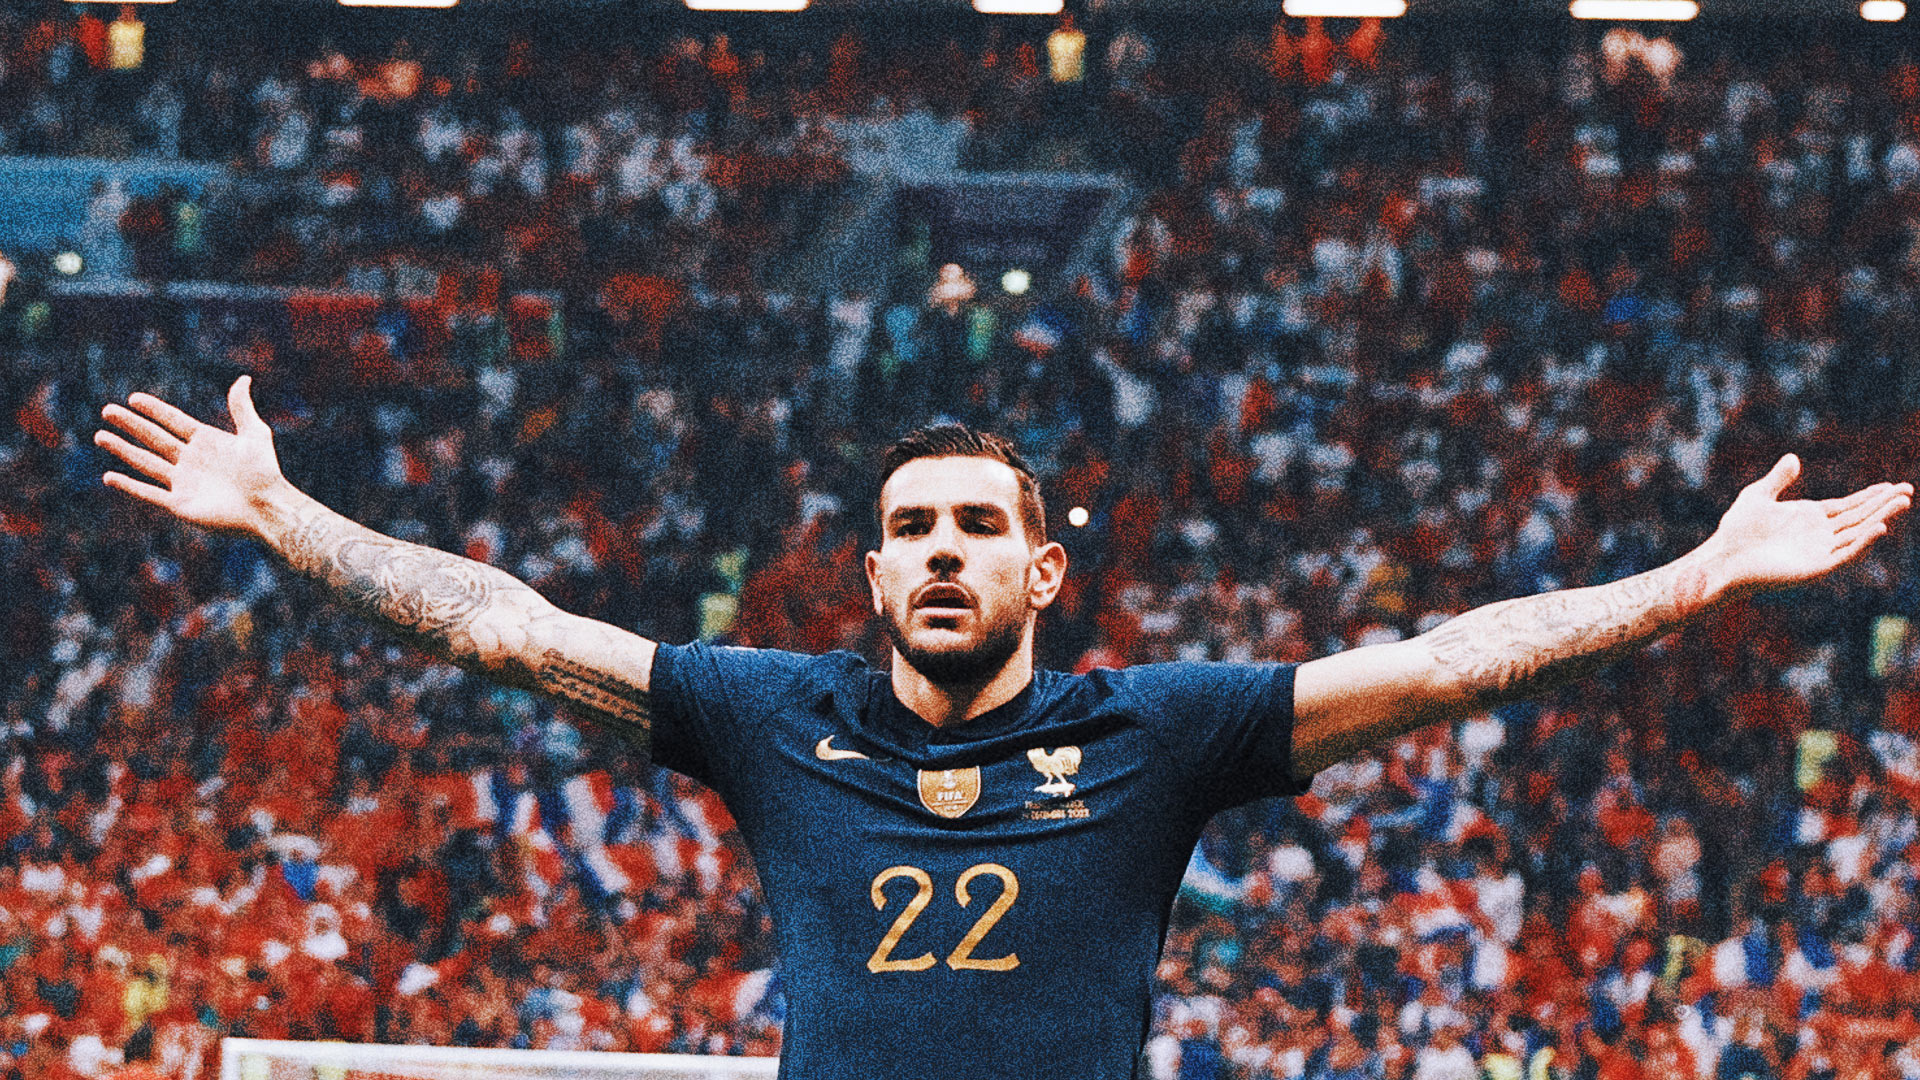 World Cup Now: We have yet to see the best version of France